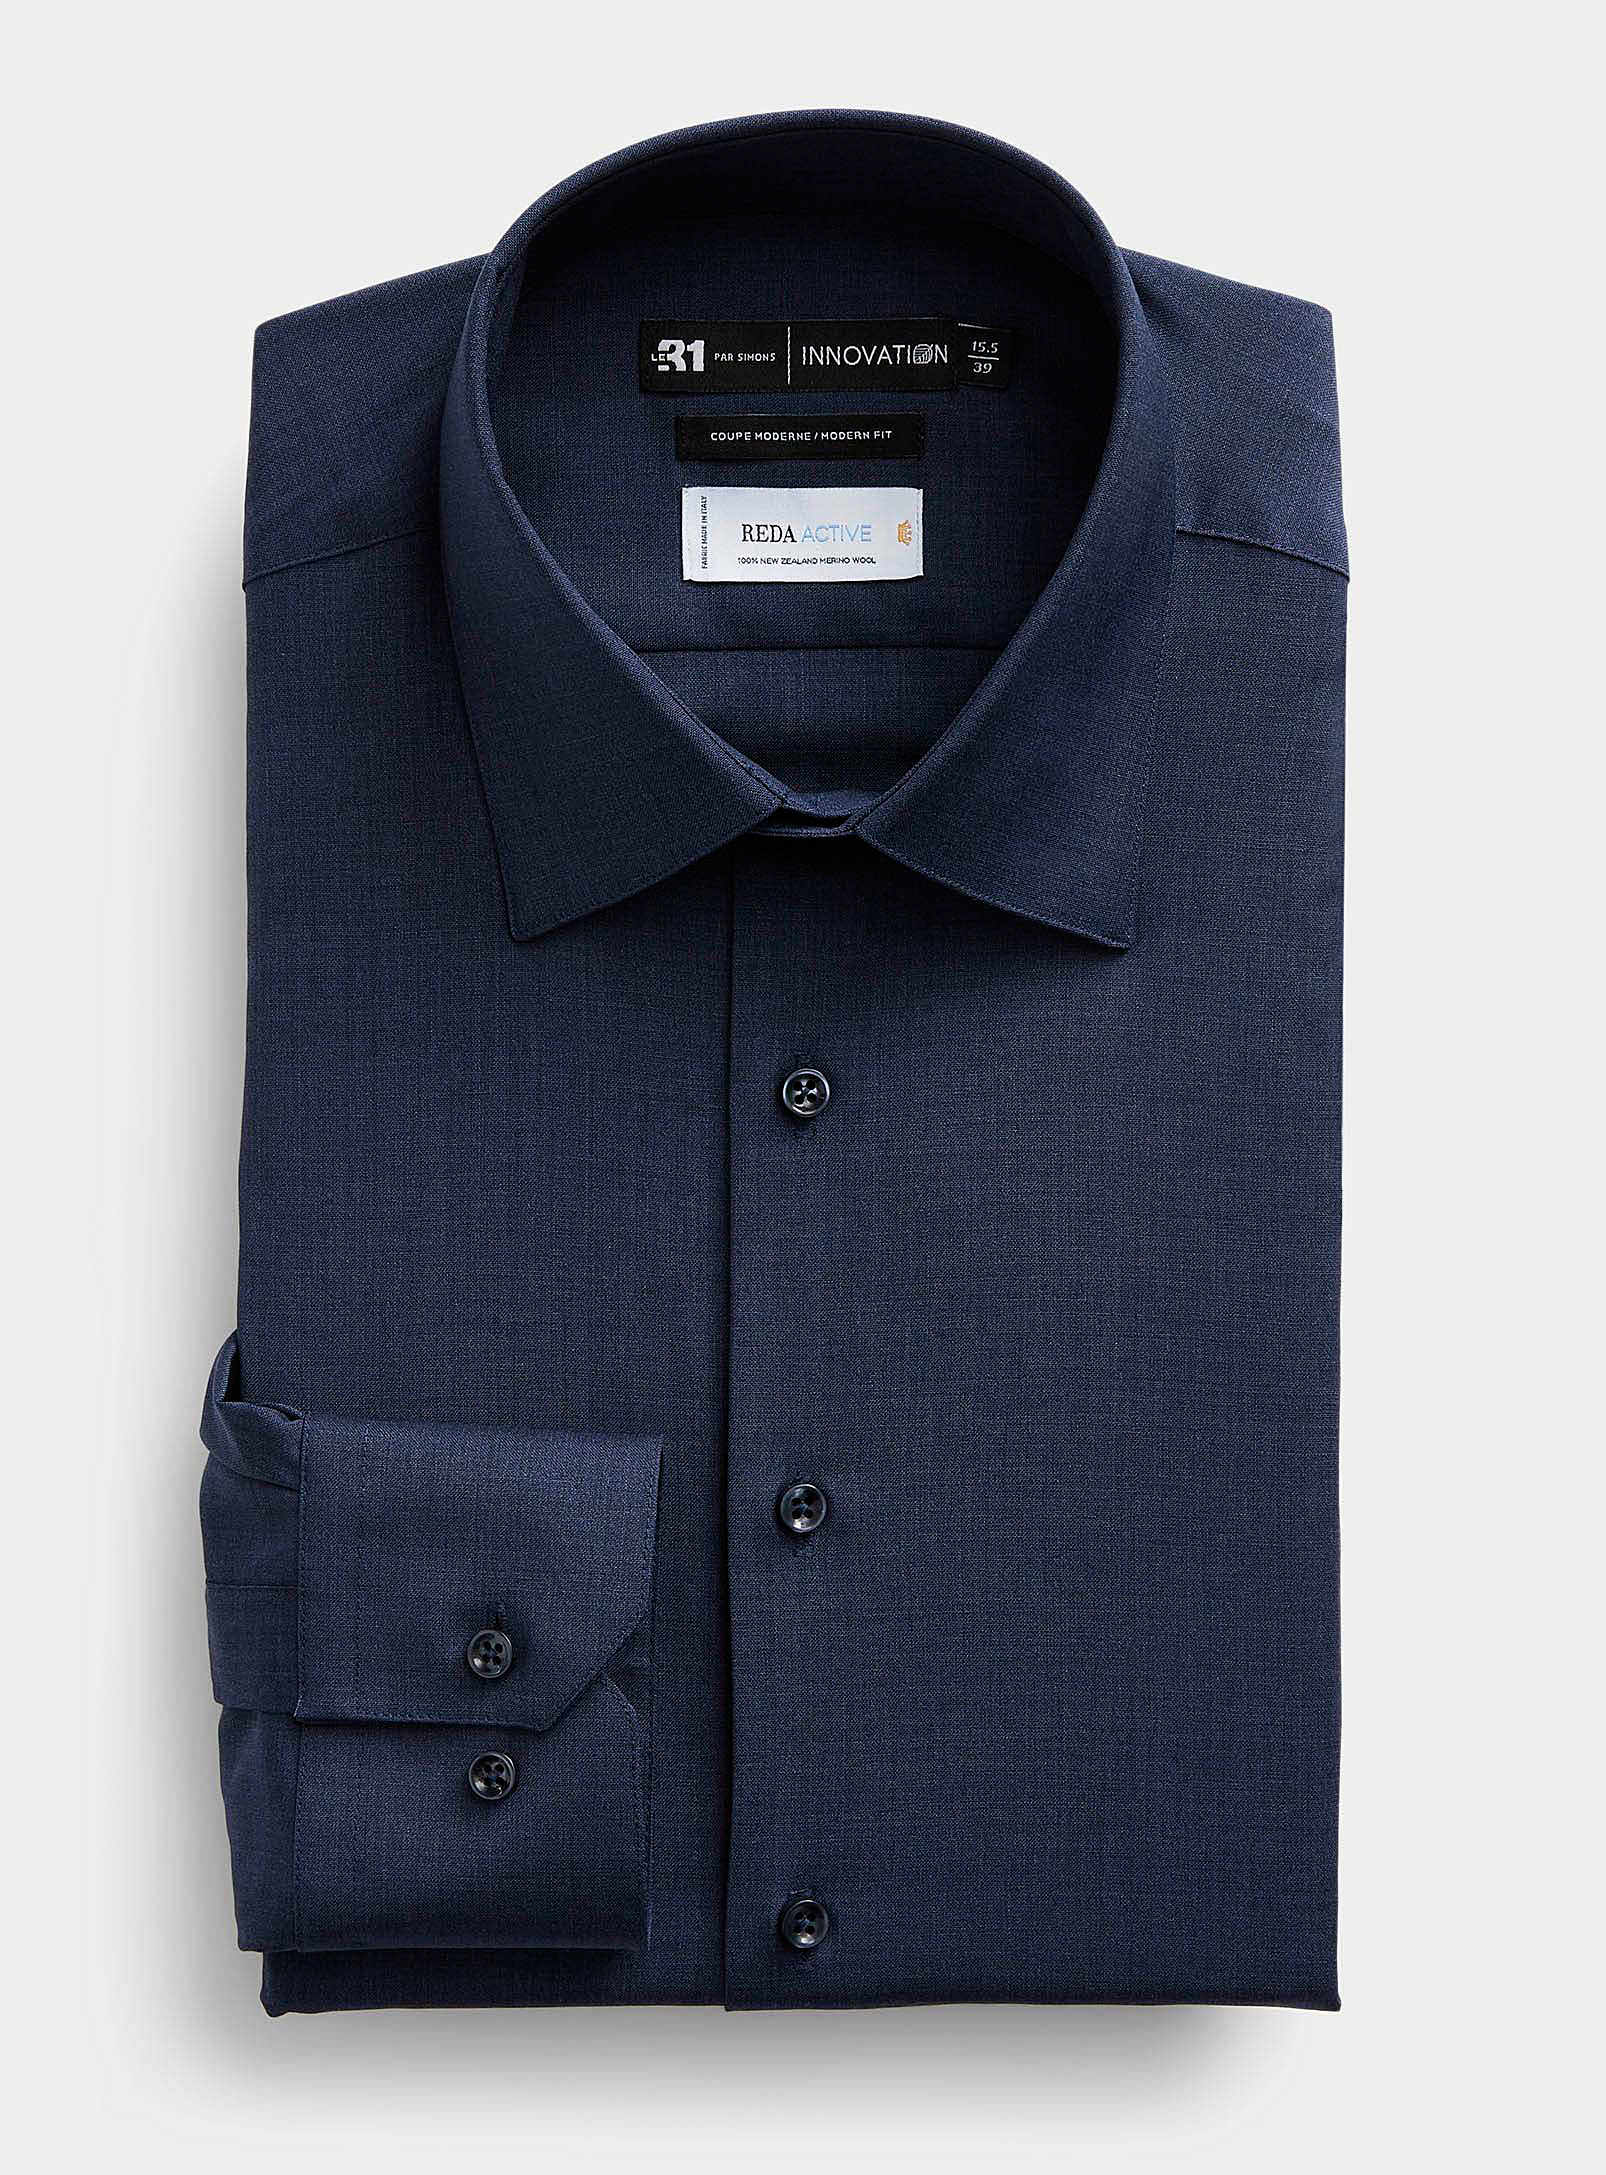 Le 31 Pure Merino Wool Shirt Modern Fit Innovation Collection In Marine Blue